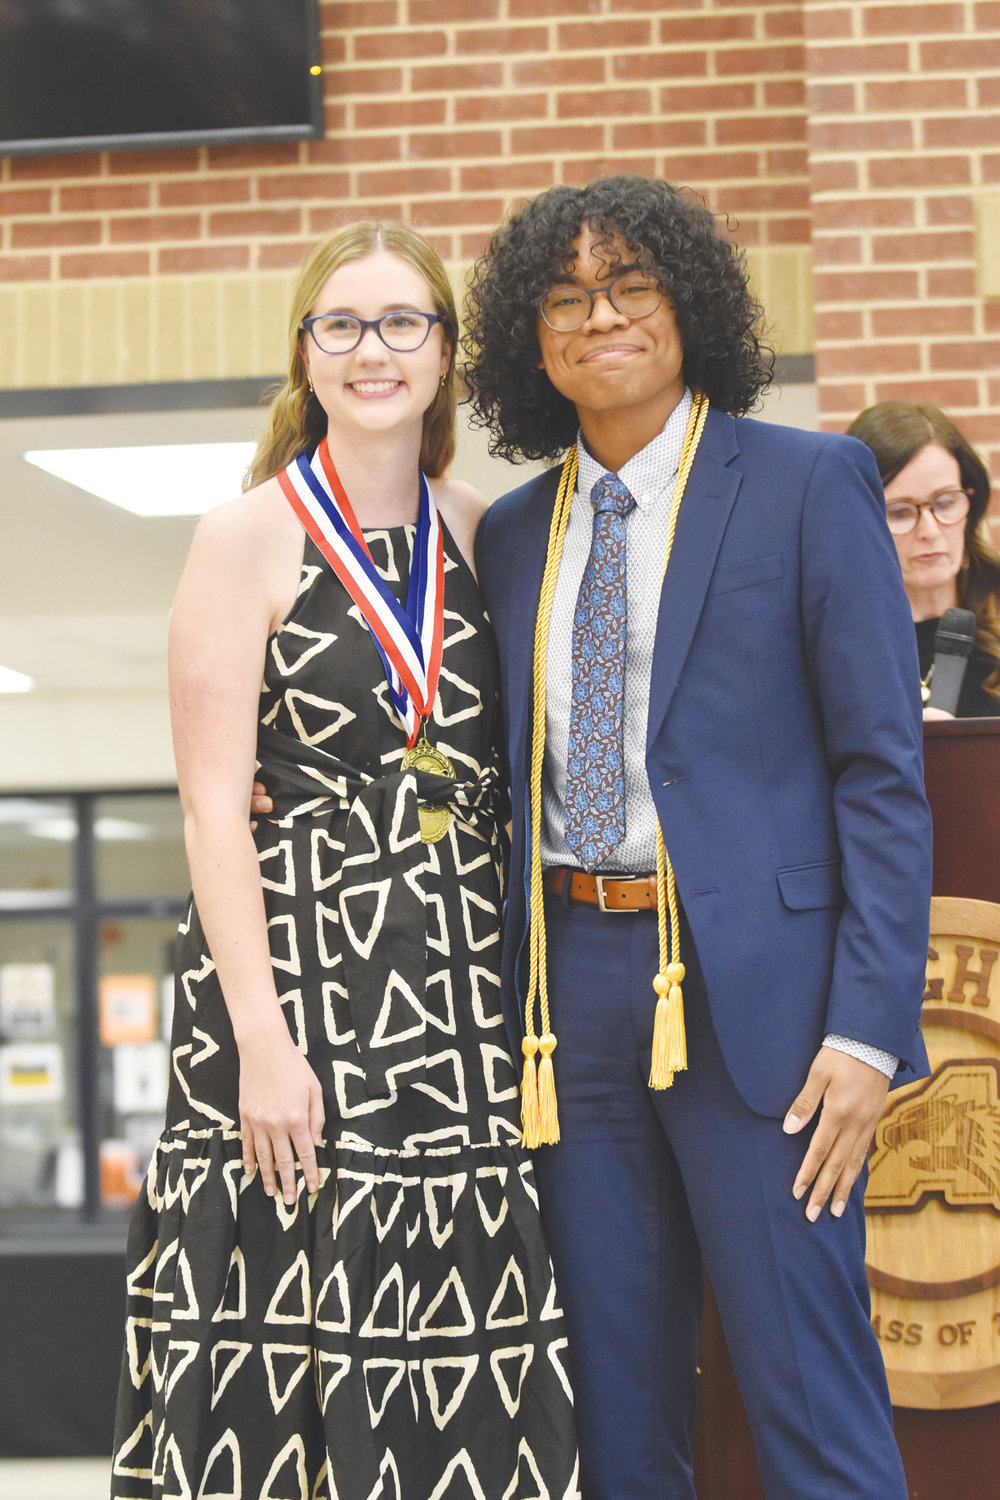 Raymond Polexi is the son of Reggie and Kimi Polexi. He plans to attend the University of Texas at San Antonio, major in microbiology and immunology, and become a medical scientist. He honored Mrs. Alexis Spencer.